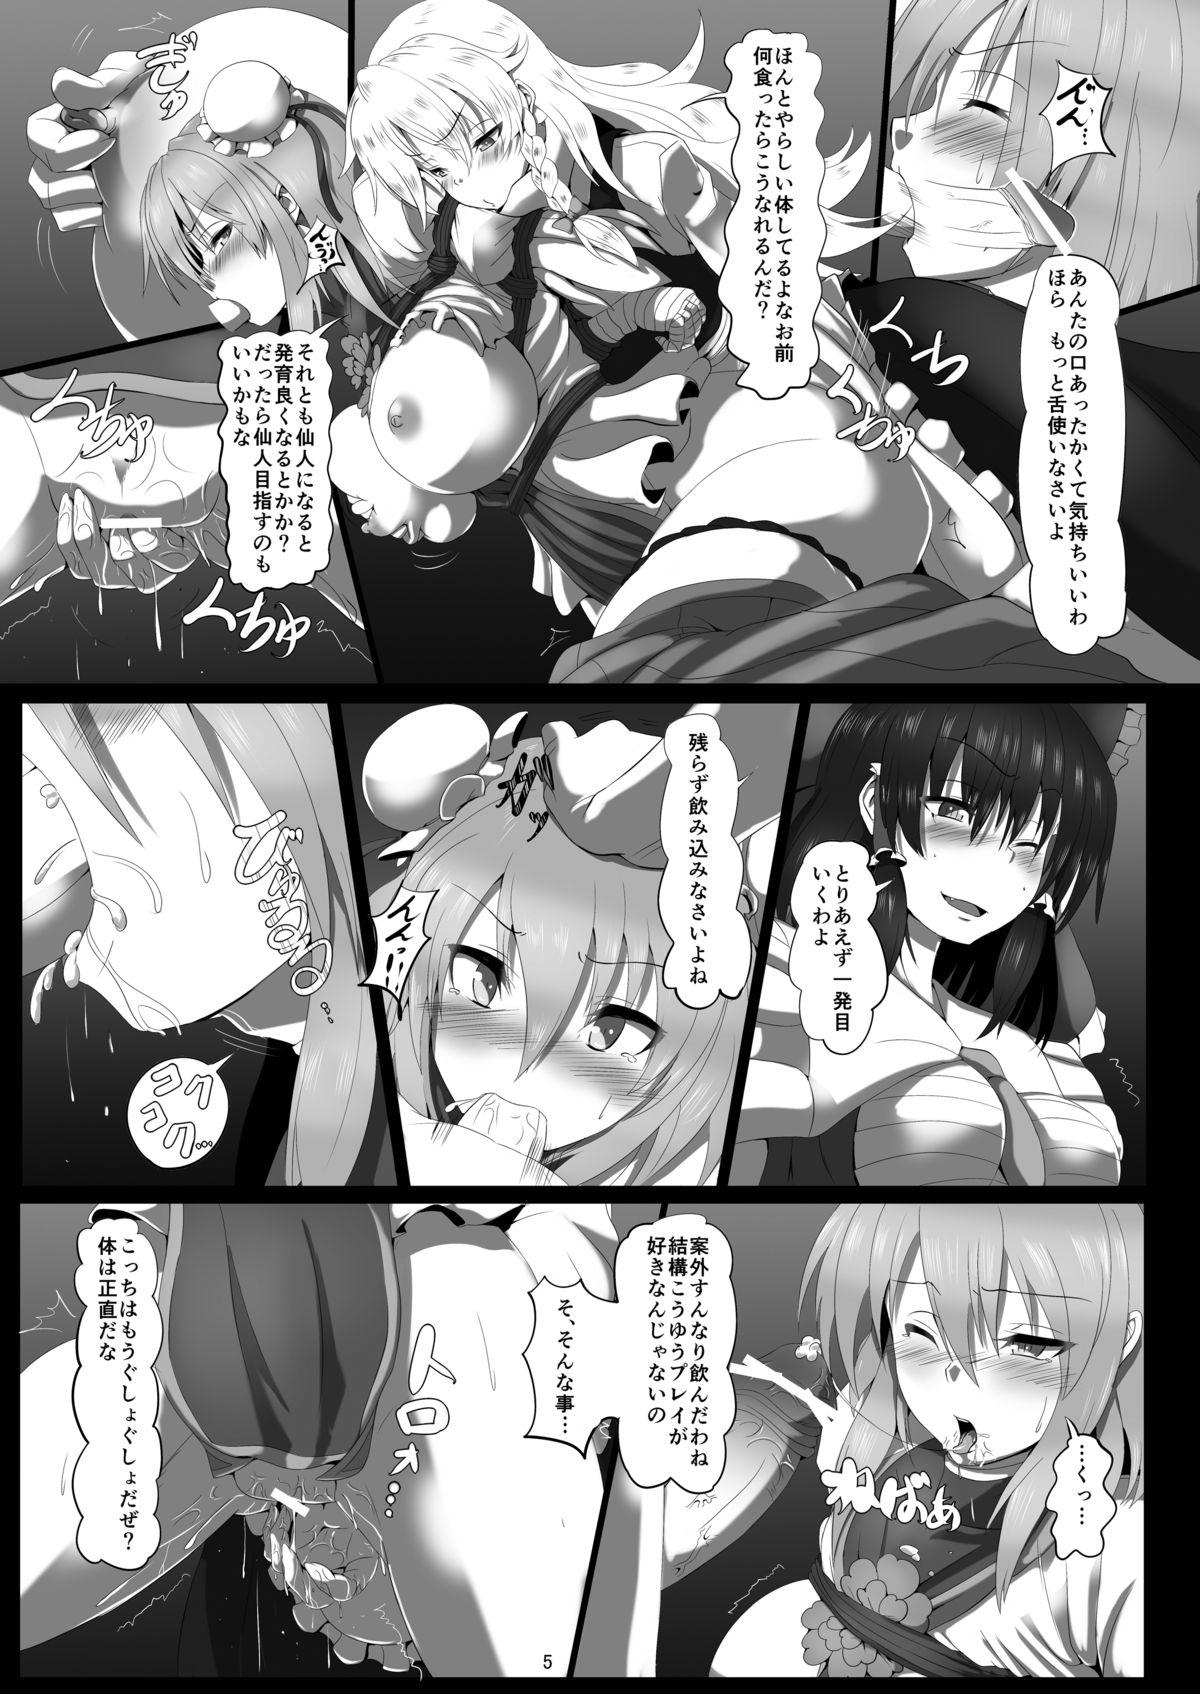 Nasty Porn Kasen no Kankei - Touhou project Shoplifter - Page 6